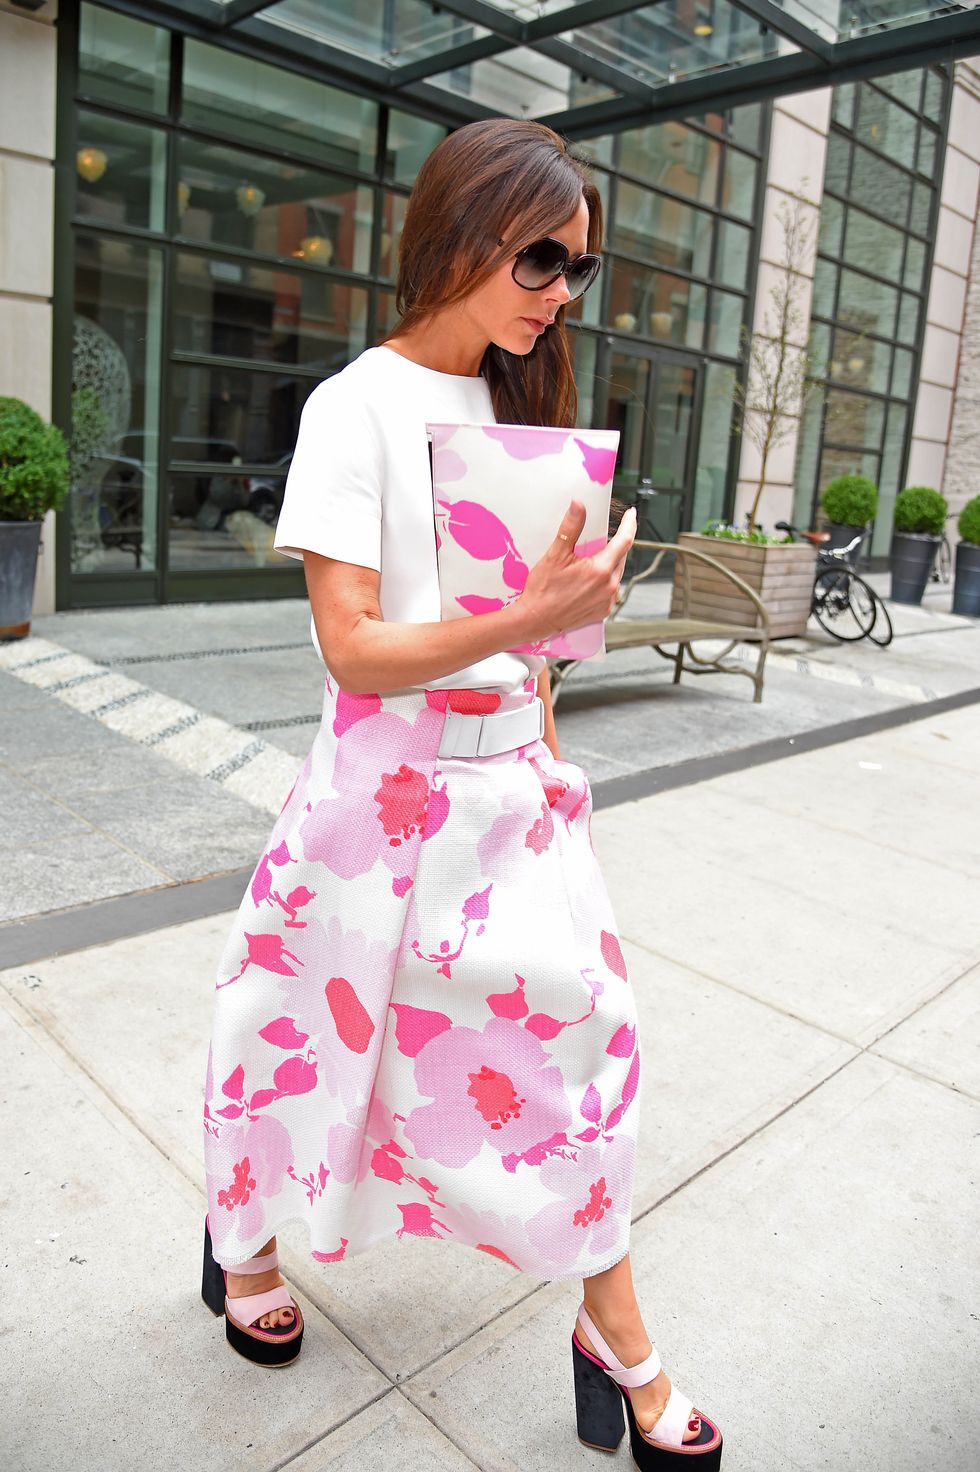 Victoria Beckham wearing a pink floral skirt in NYC